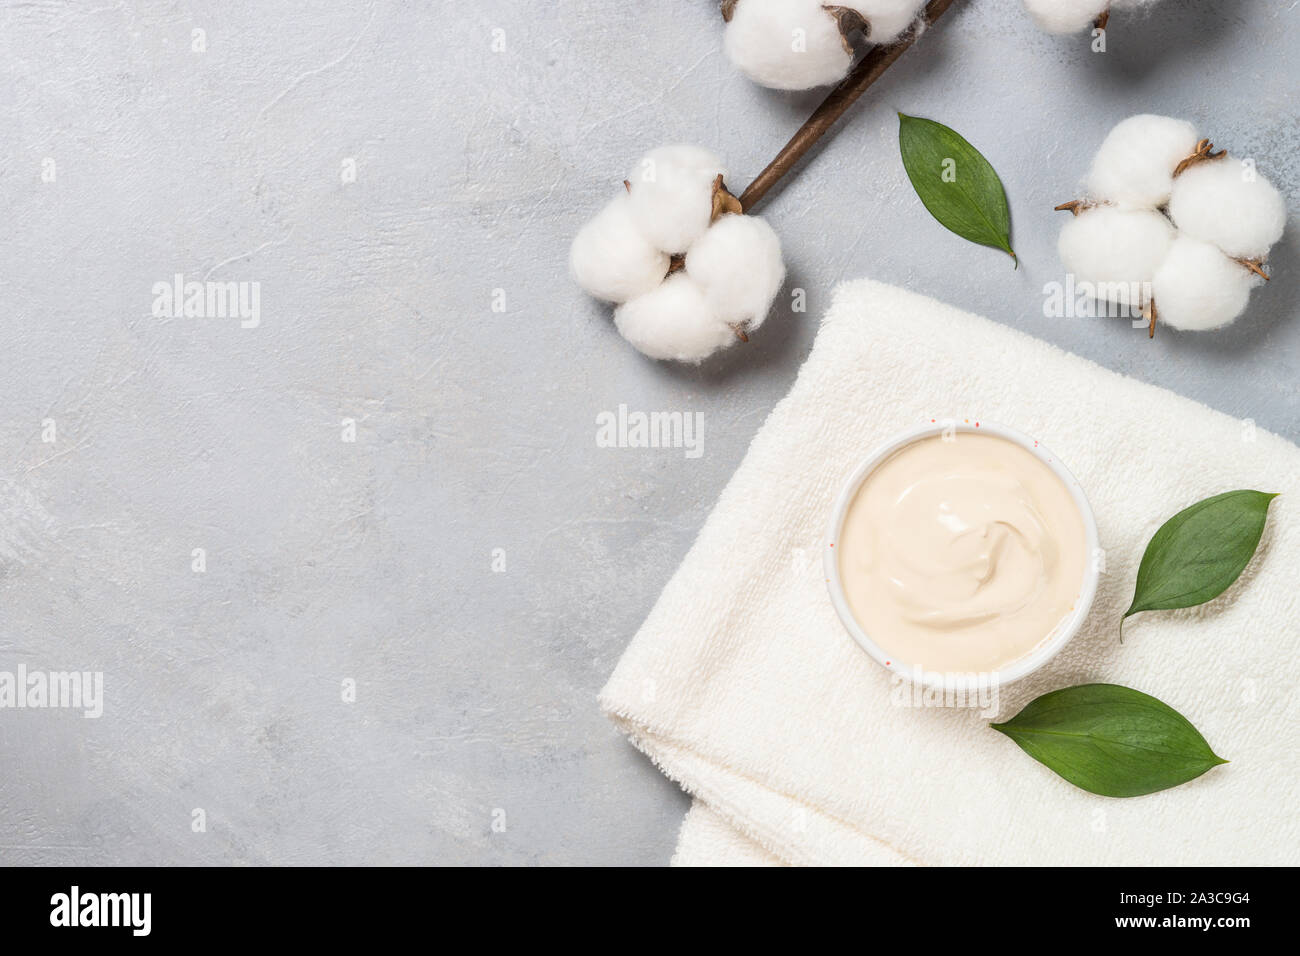 Clay mask and towel, skincare product. Stock Photo